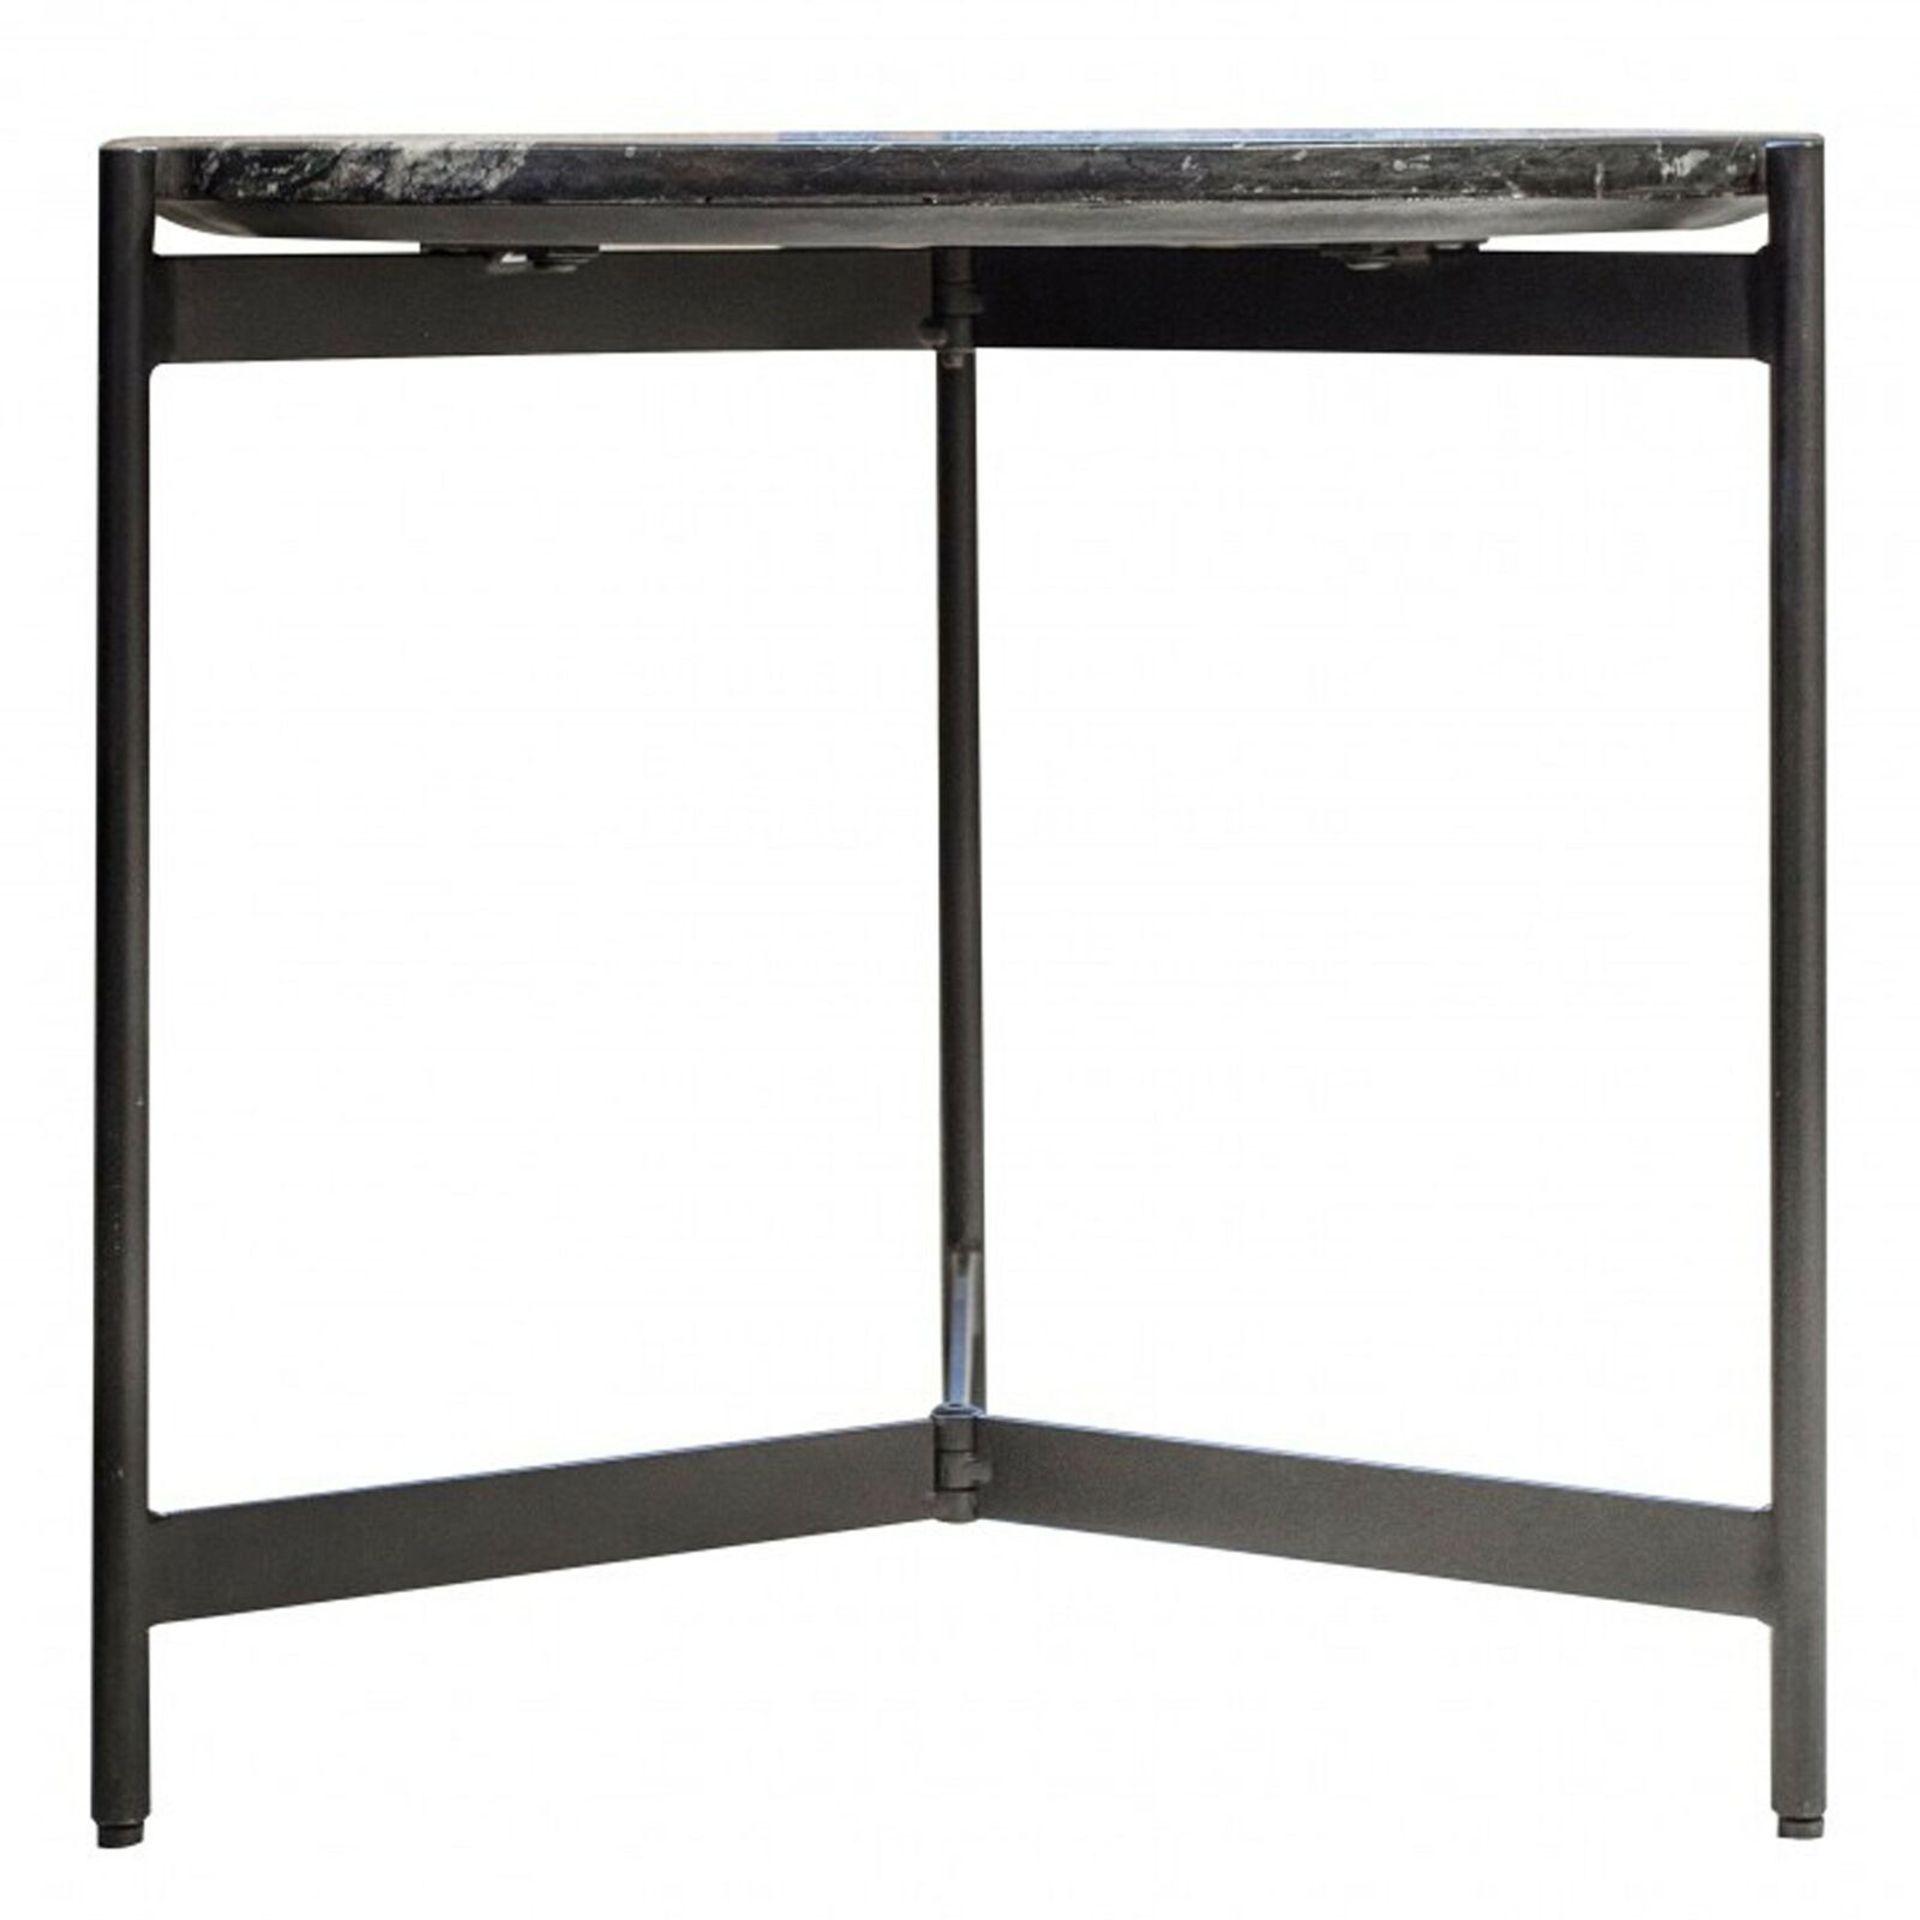 Bari Marble Top Side Table The Bari Marble Top Side Table Is The Latest In Our Range Of Modern And